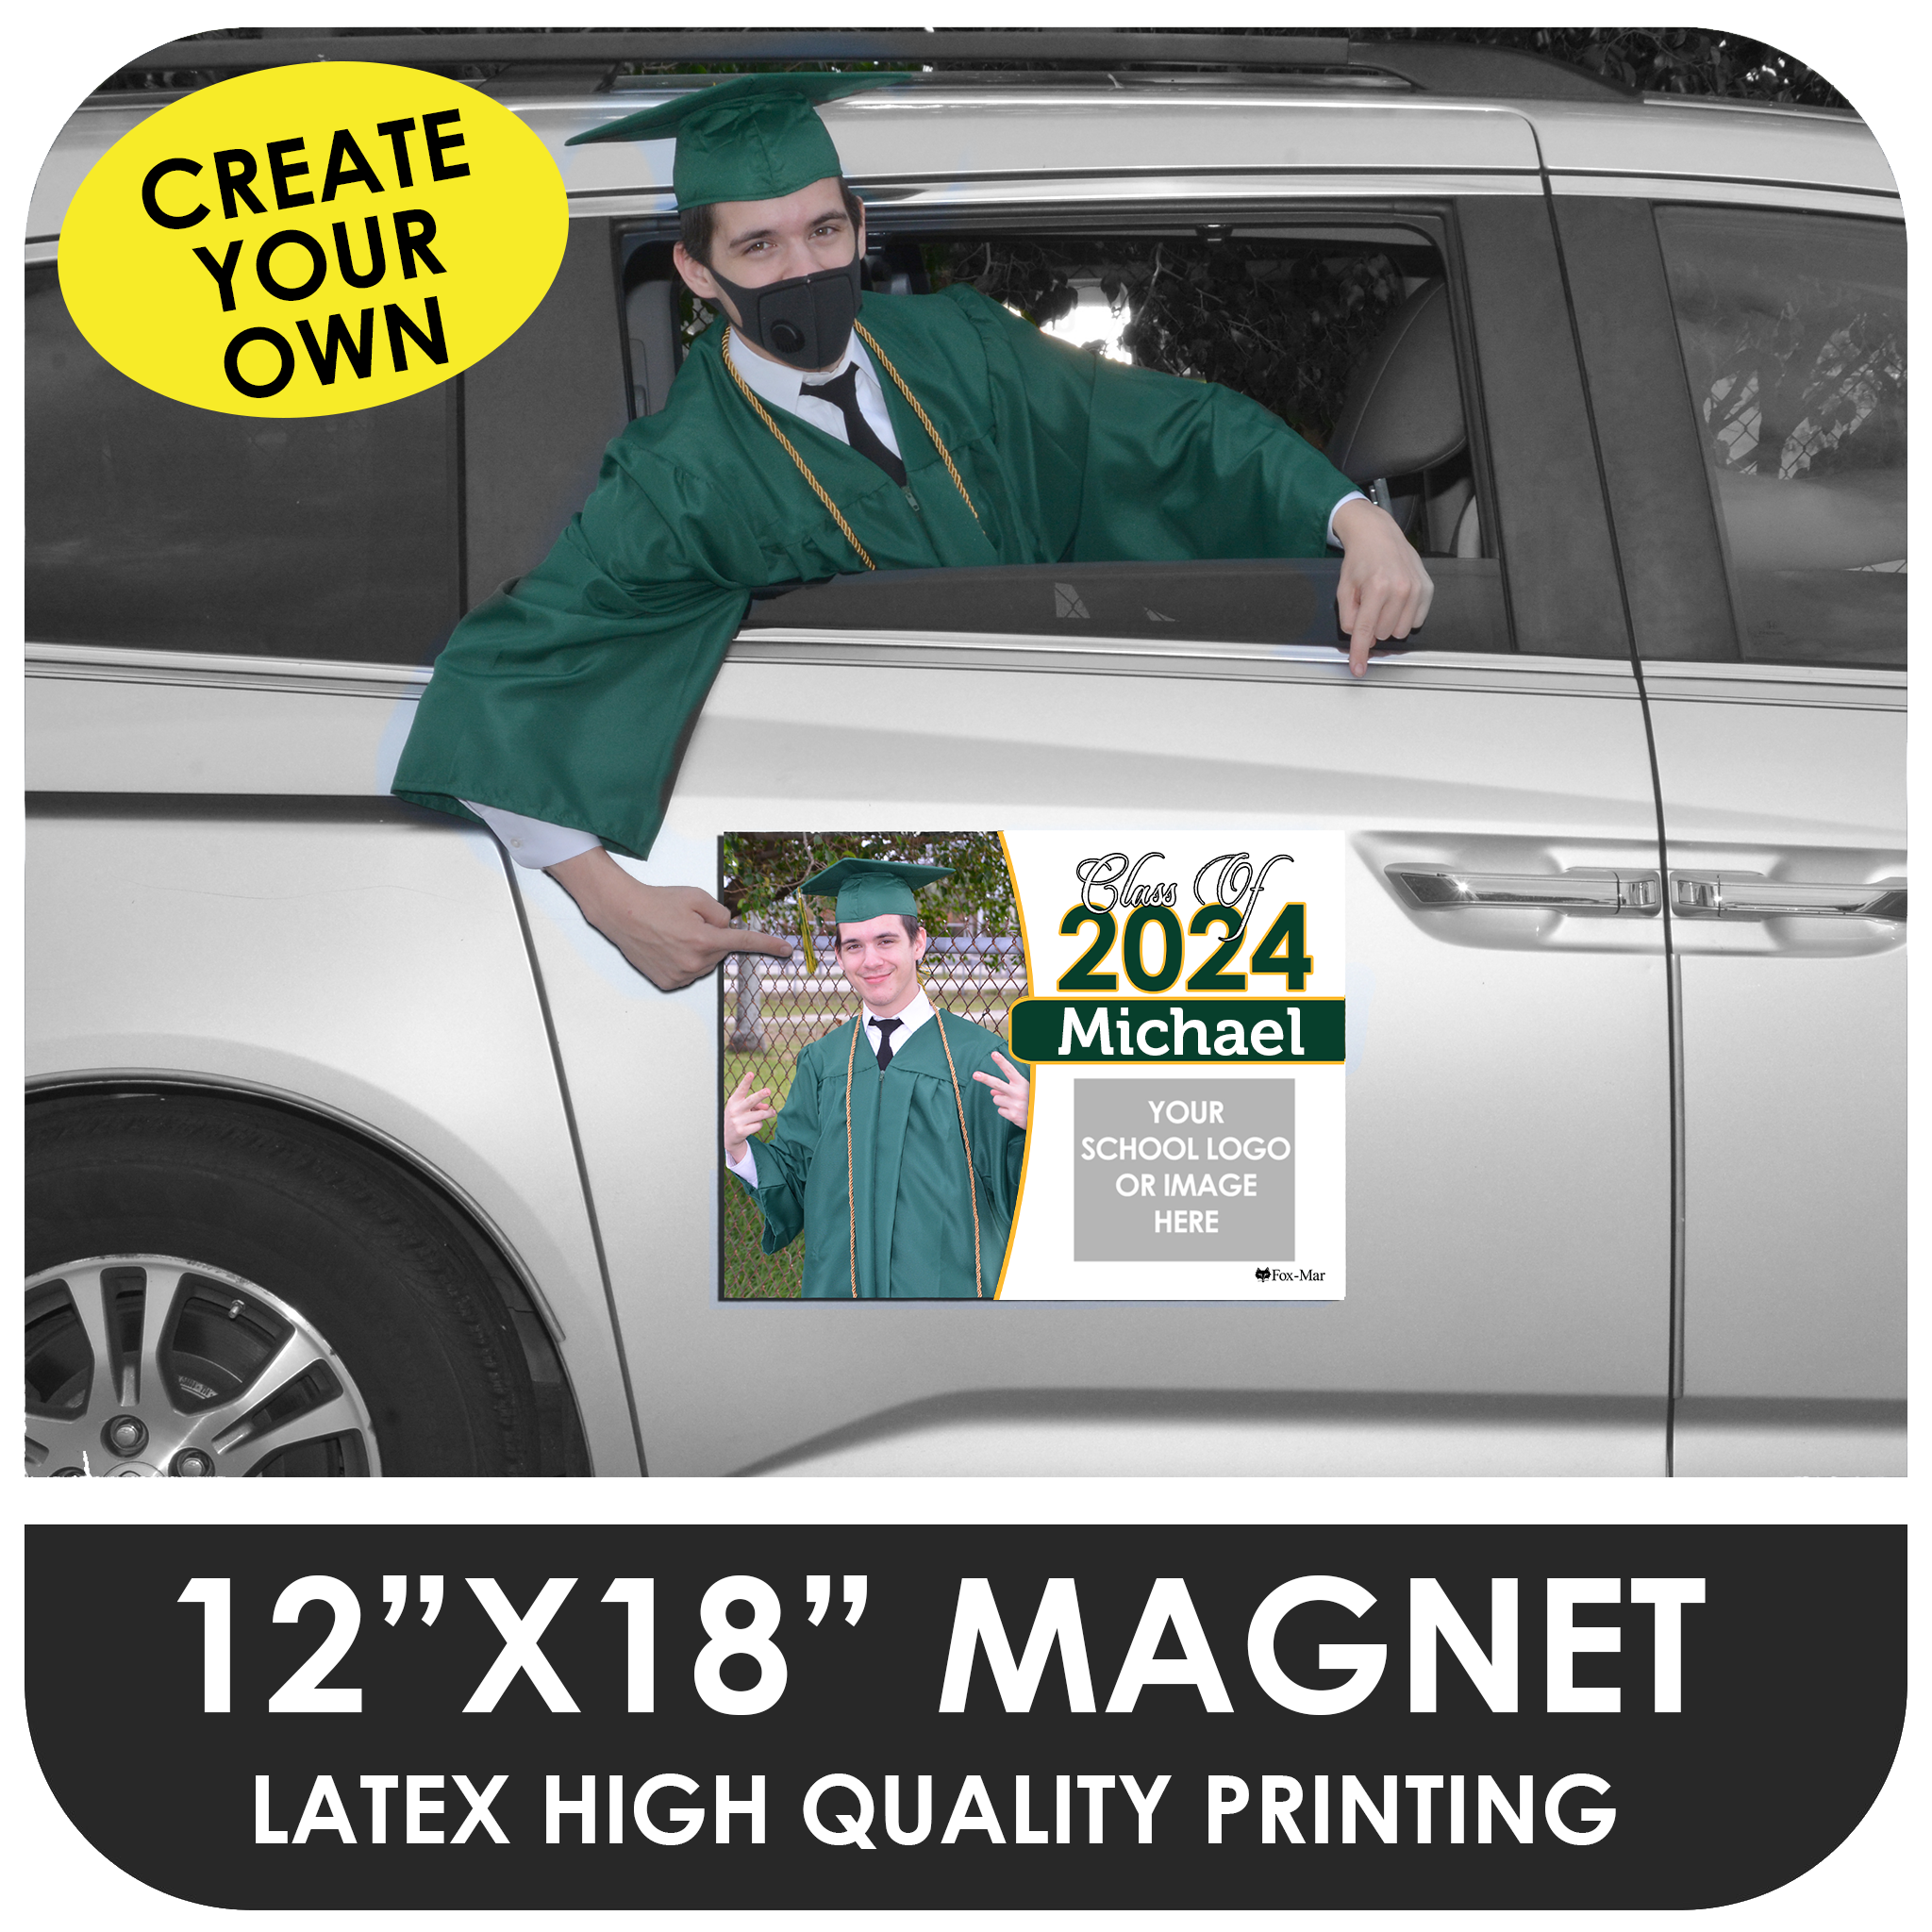 Create Your Own - Car Magnet for Graduation Parades